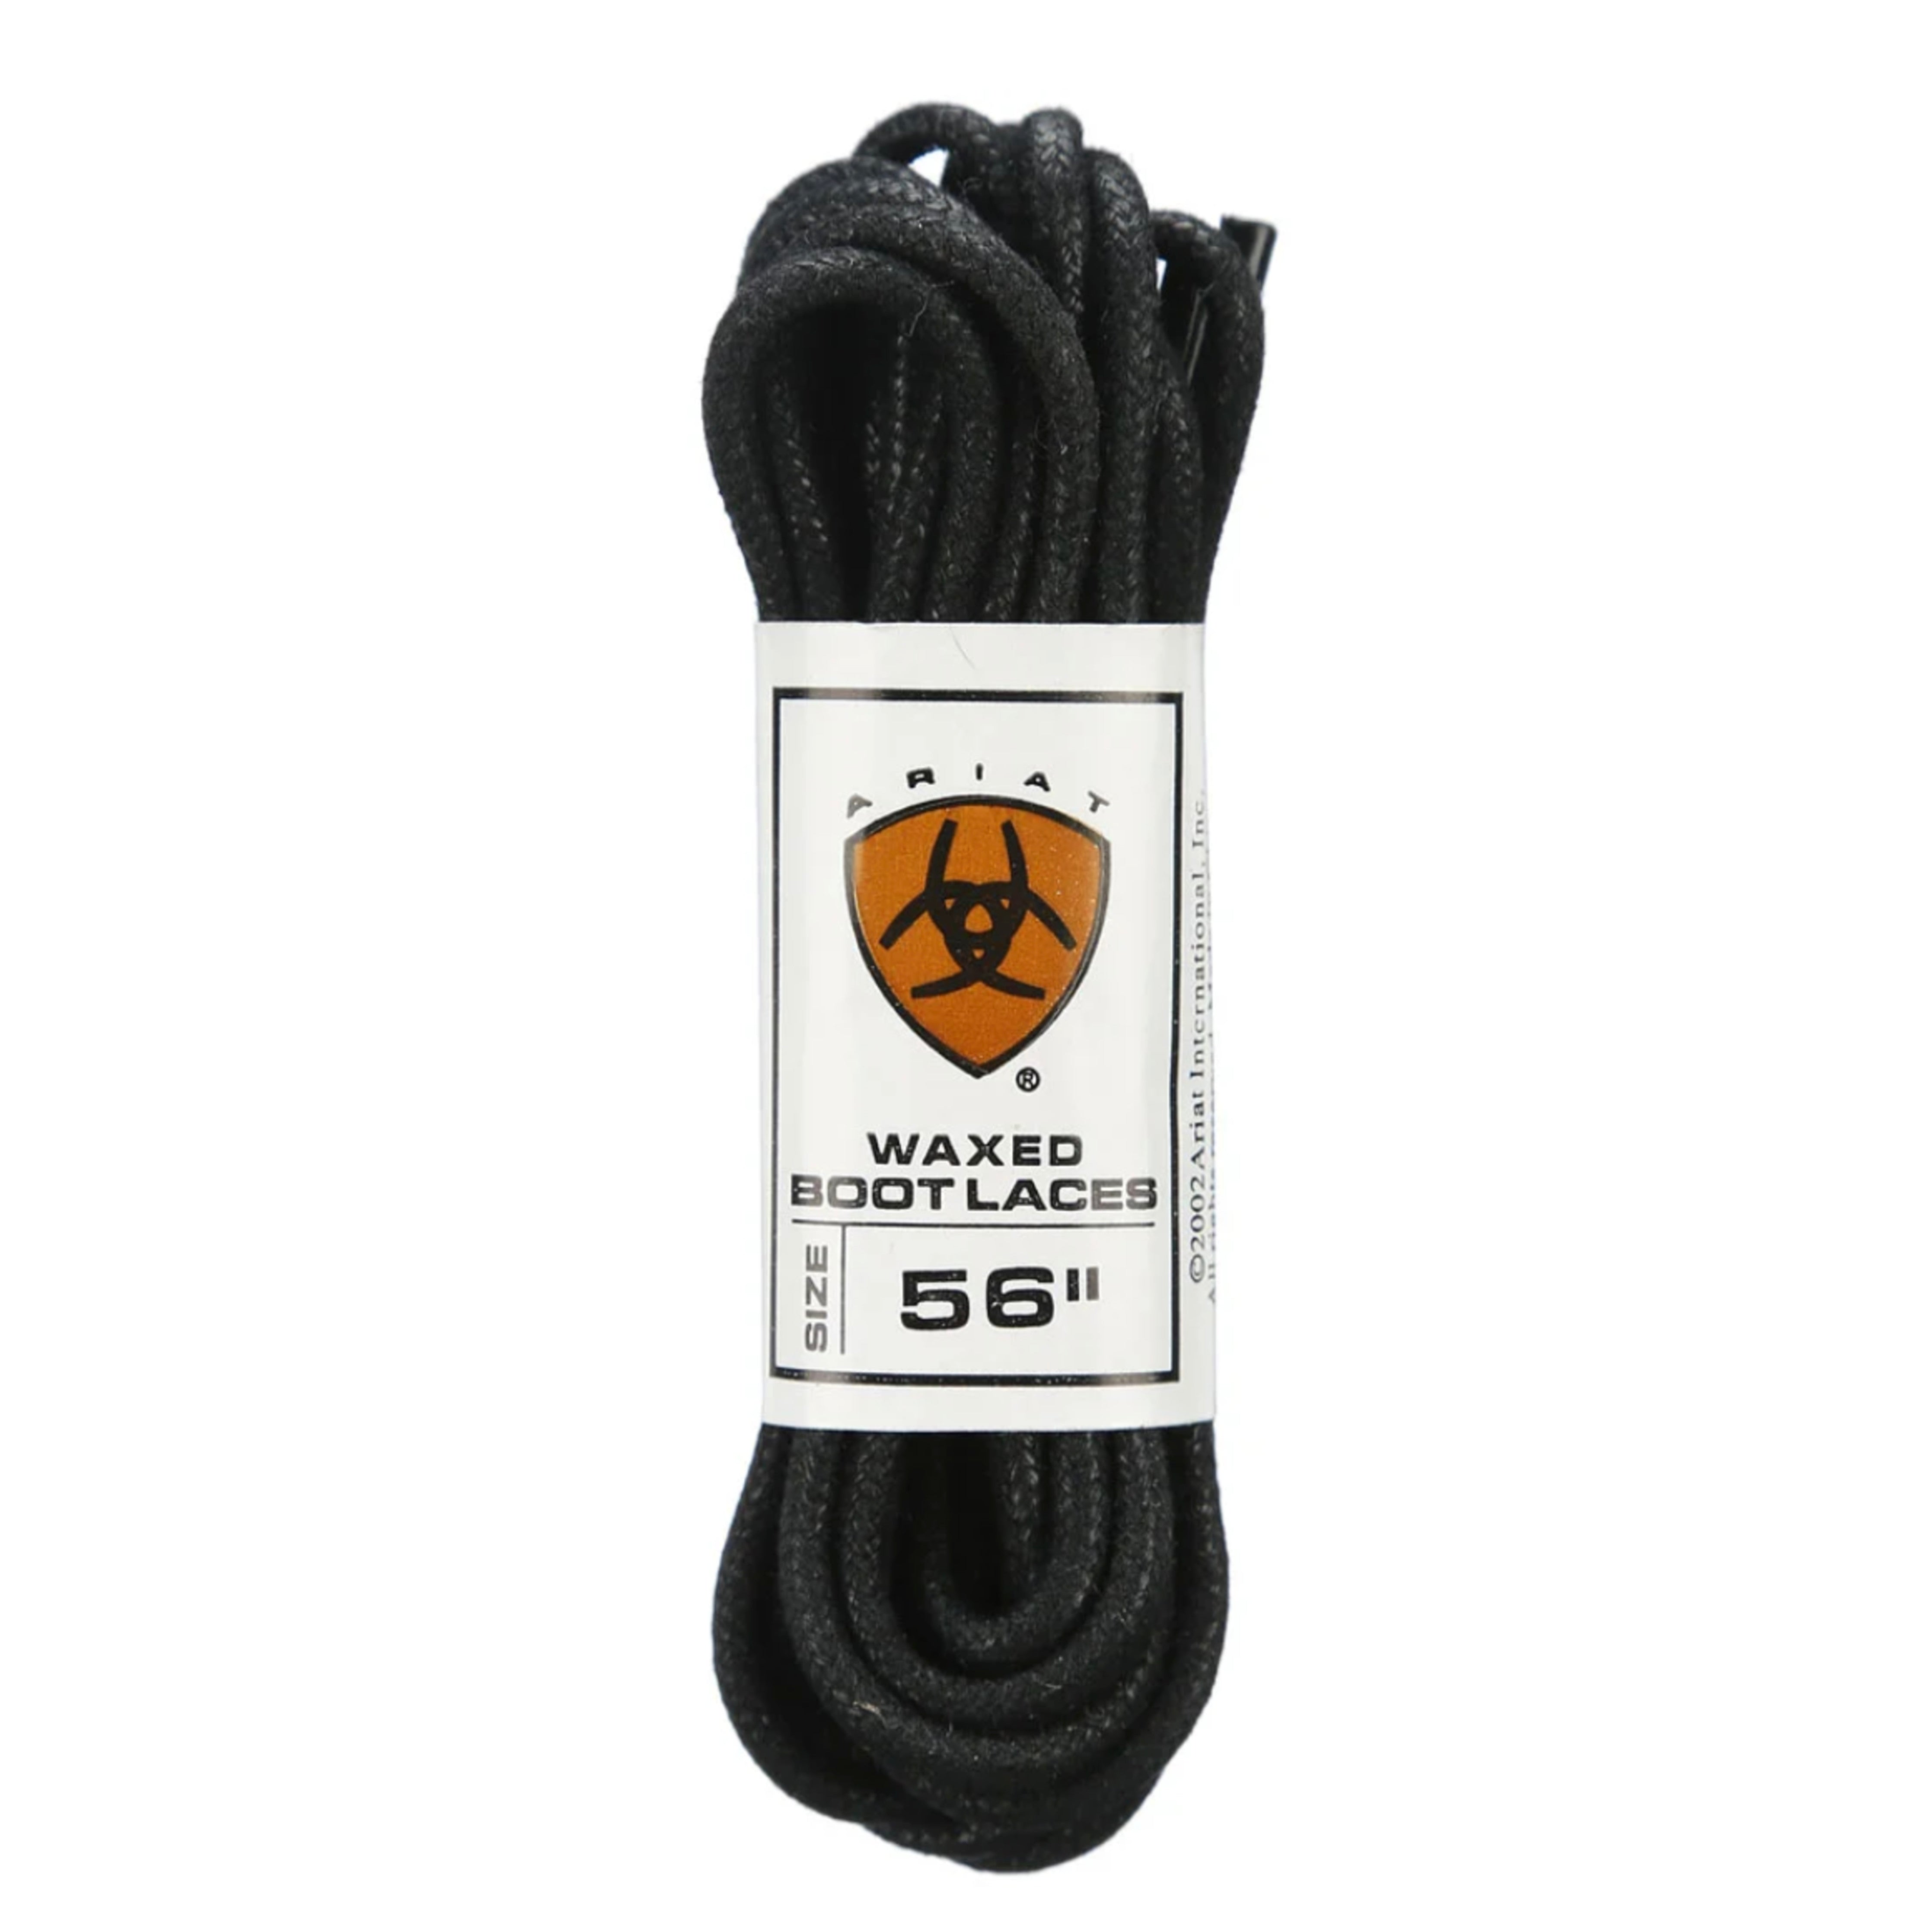 Ariat Waxed Paddock Boot Laces 56"